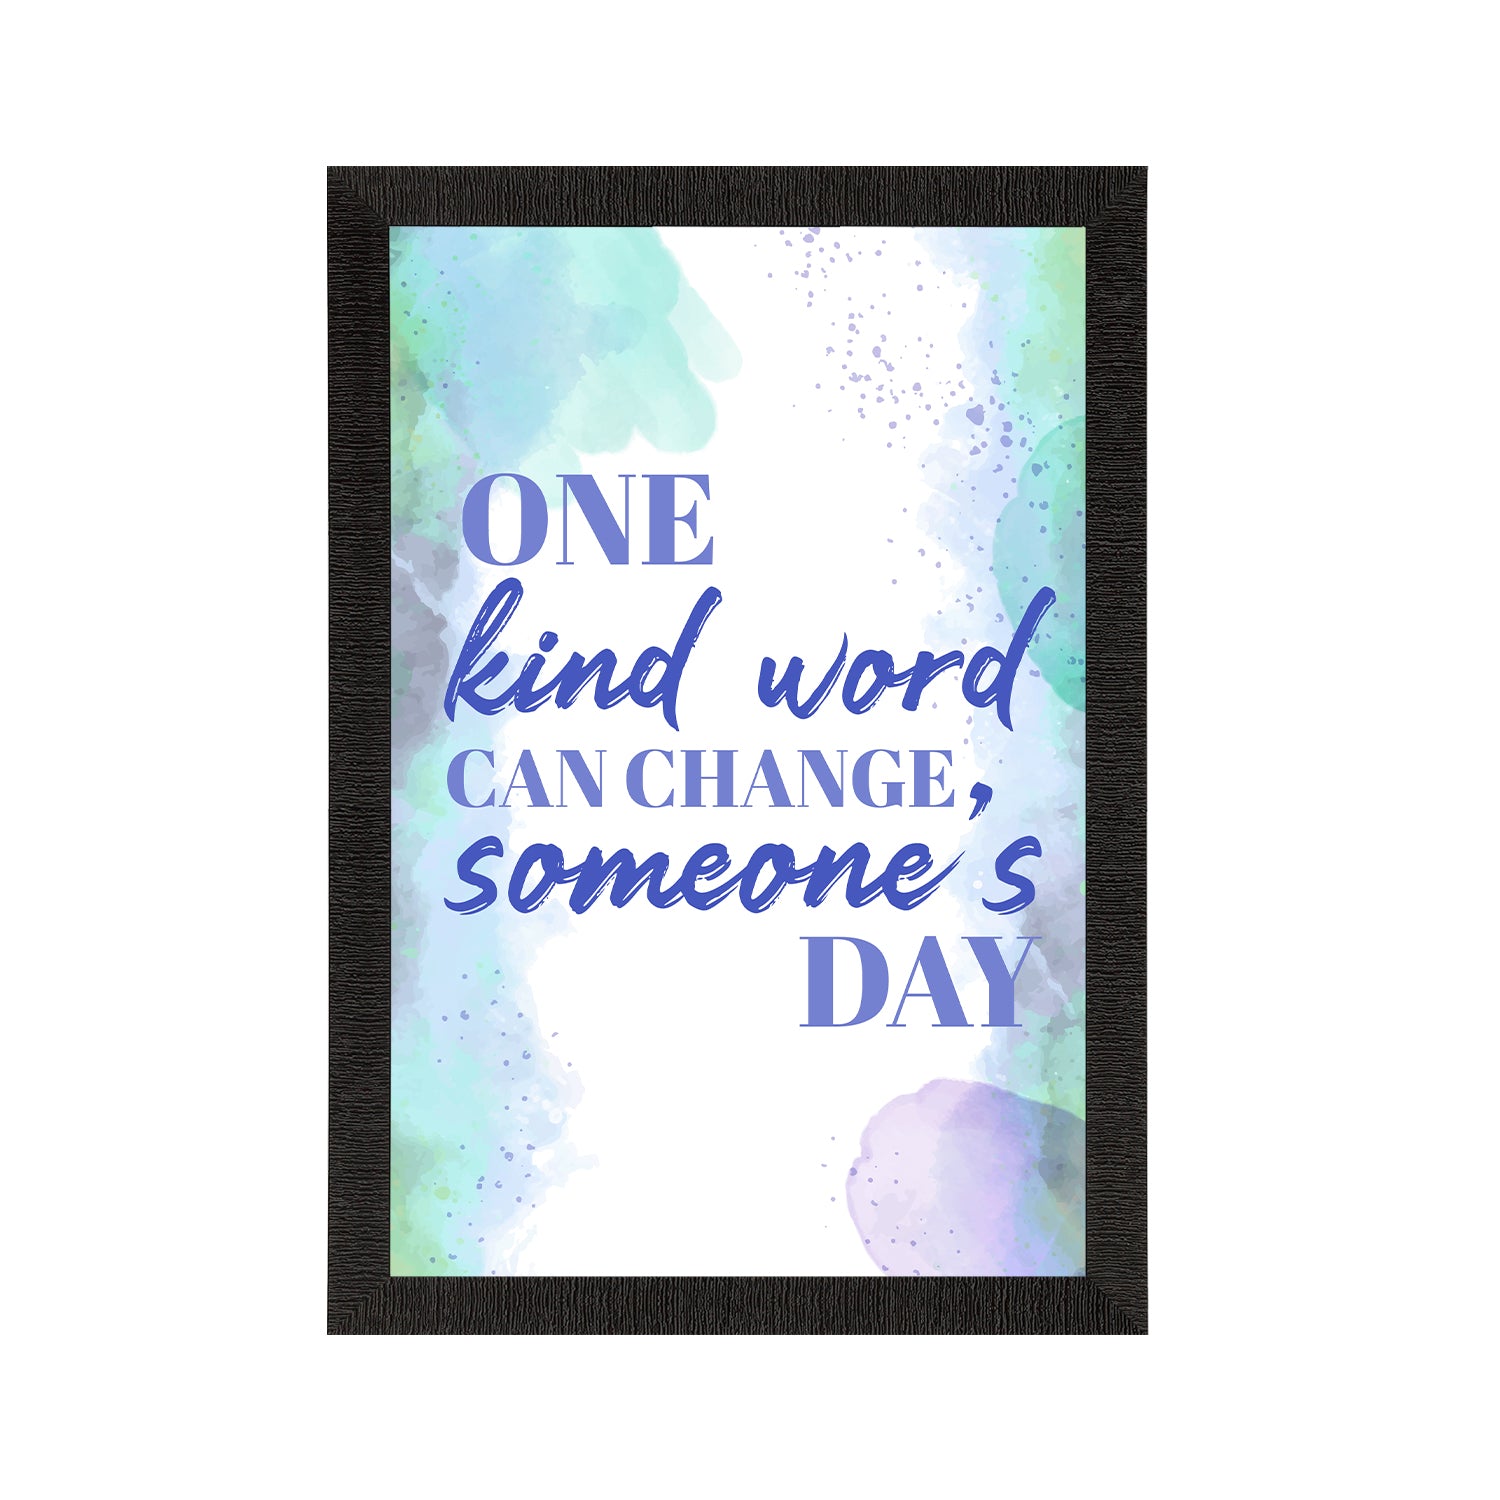 "One kind word can change someone's day" Motivational Quote Satin Matt Texture UV Art Painting